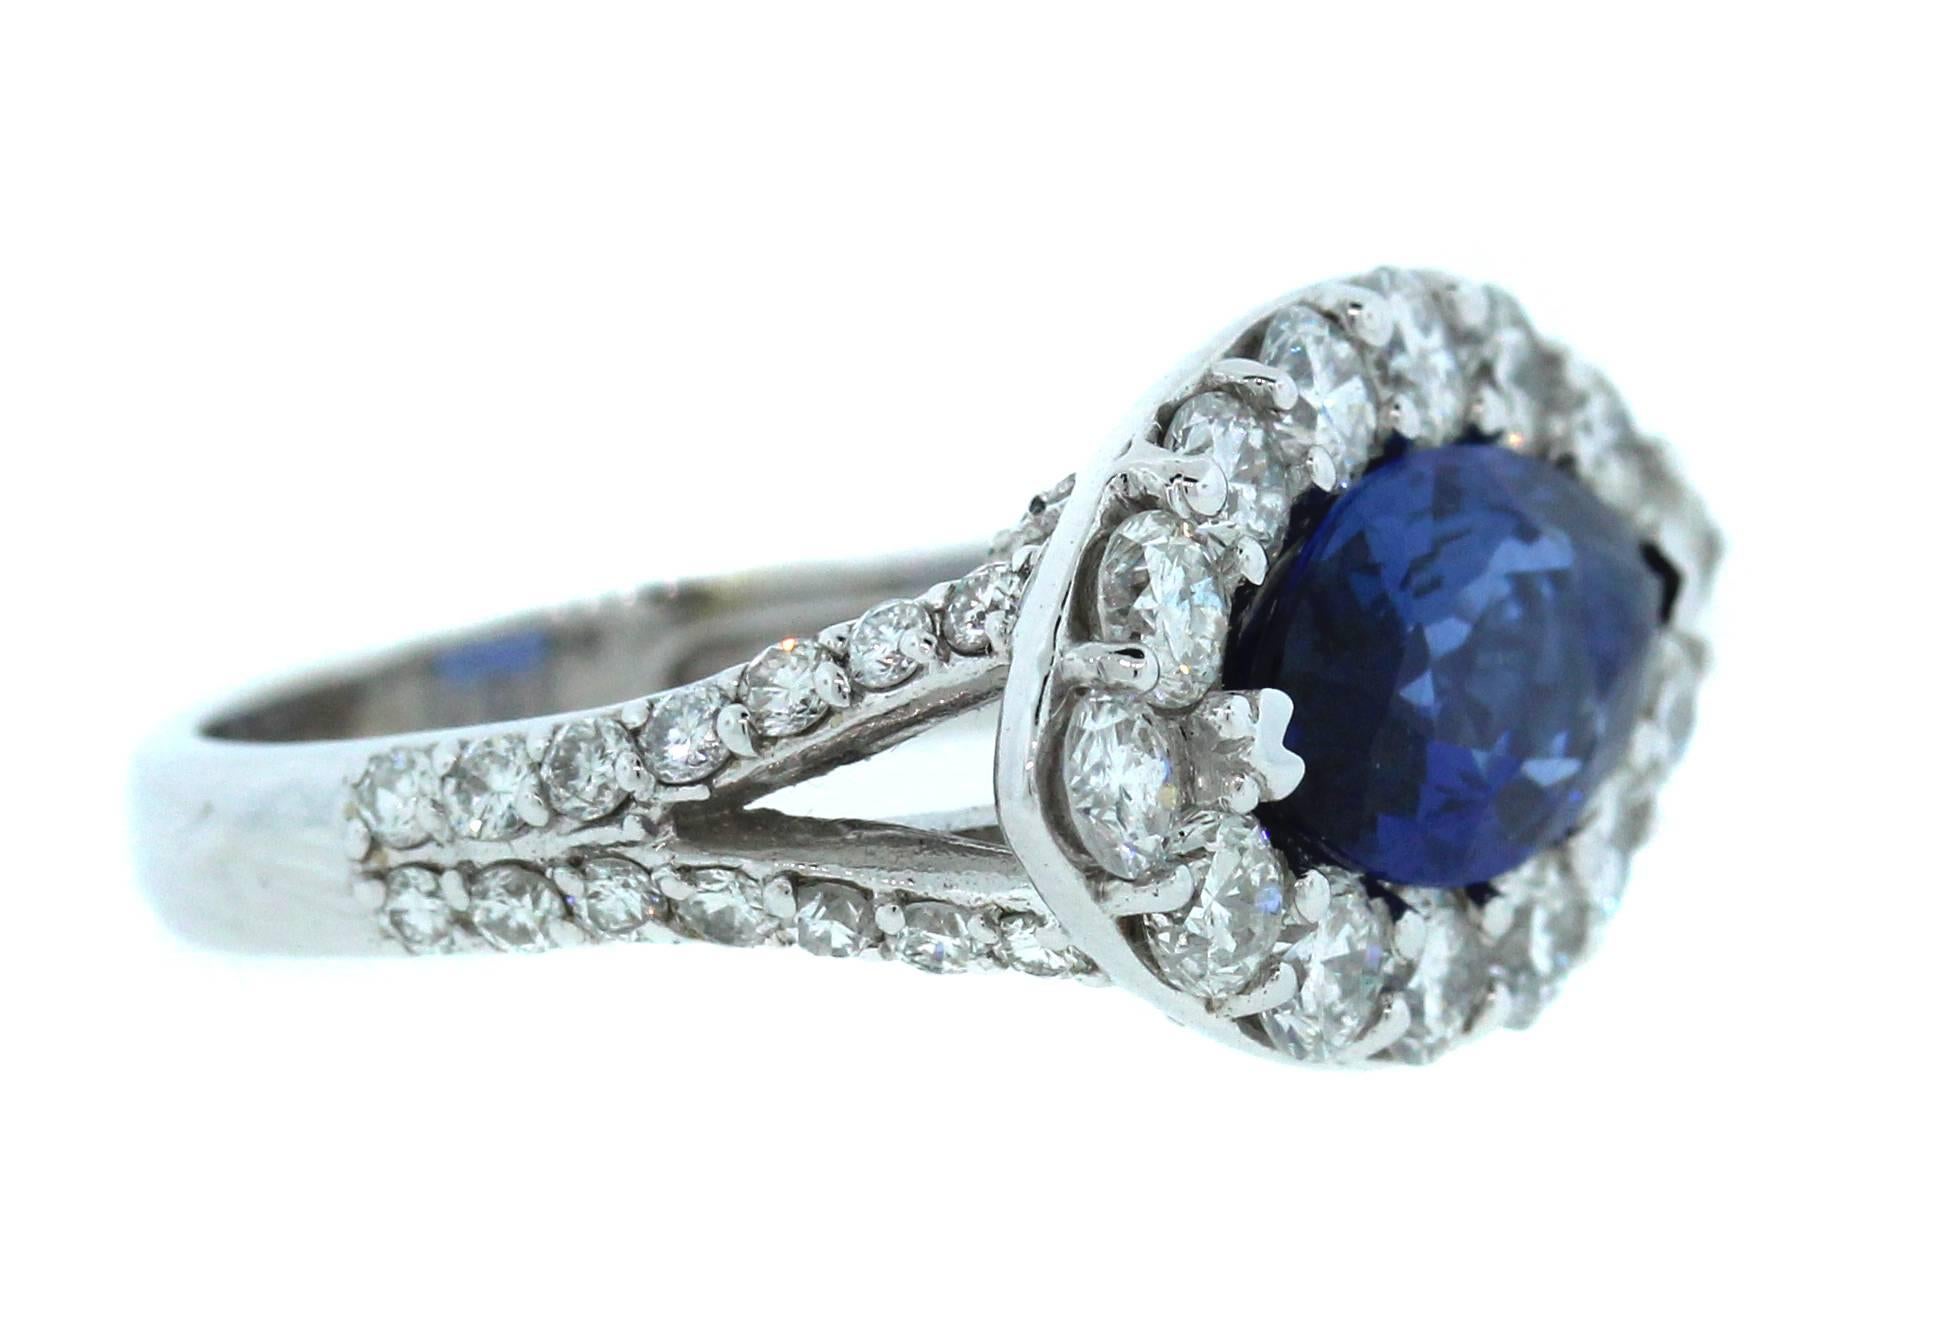 18k White Gold Ring with Blue Sapphire Center Surrounded by Diamonds

2.55ct. Blue Sapphire. Marquis cut

2ct. apprx diamonds throughout face of ring and half of shank

Sapphire is gorgeous blue!

Face of ring is 0.8 inch length x 0.45 inch